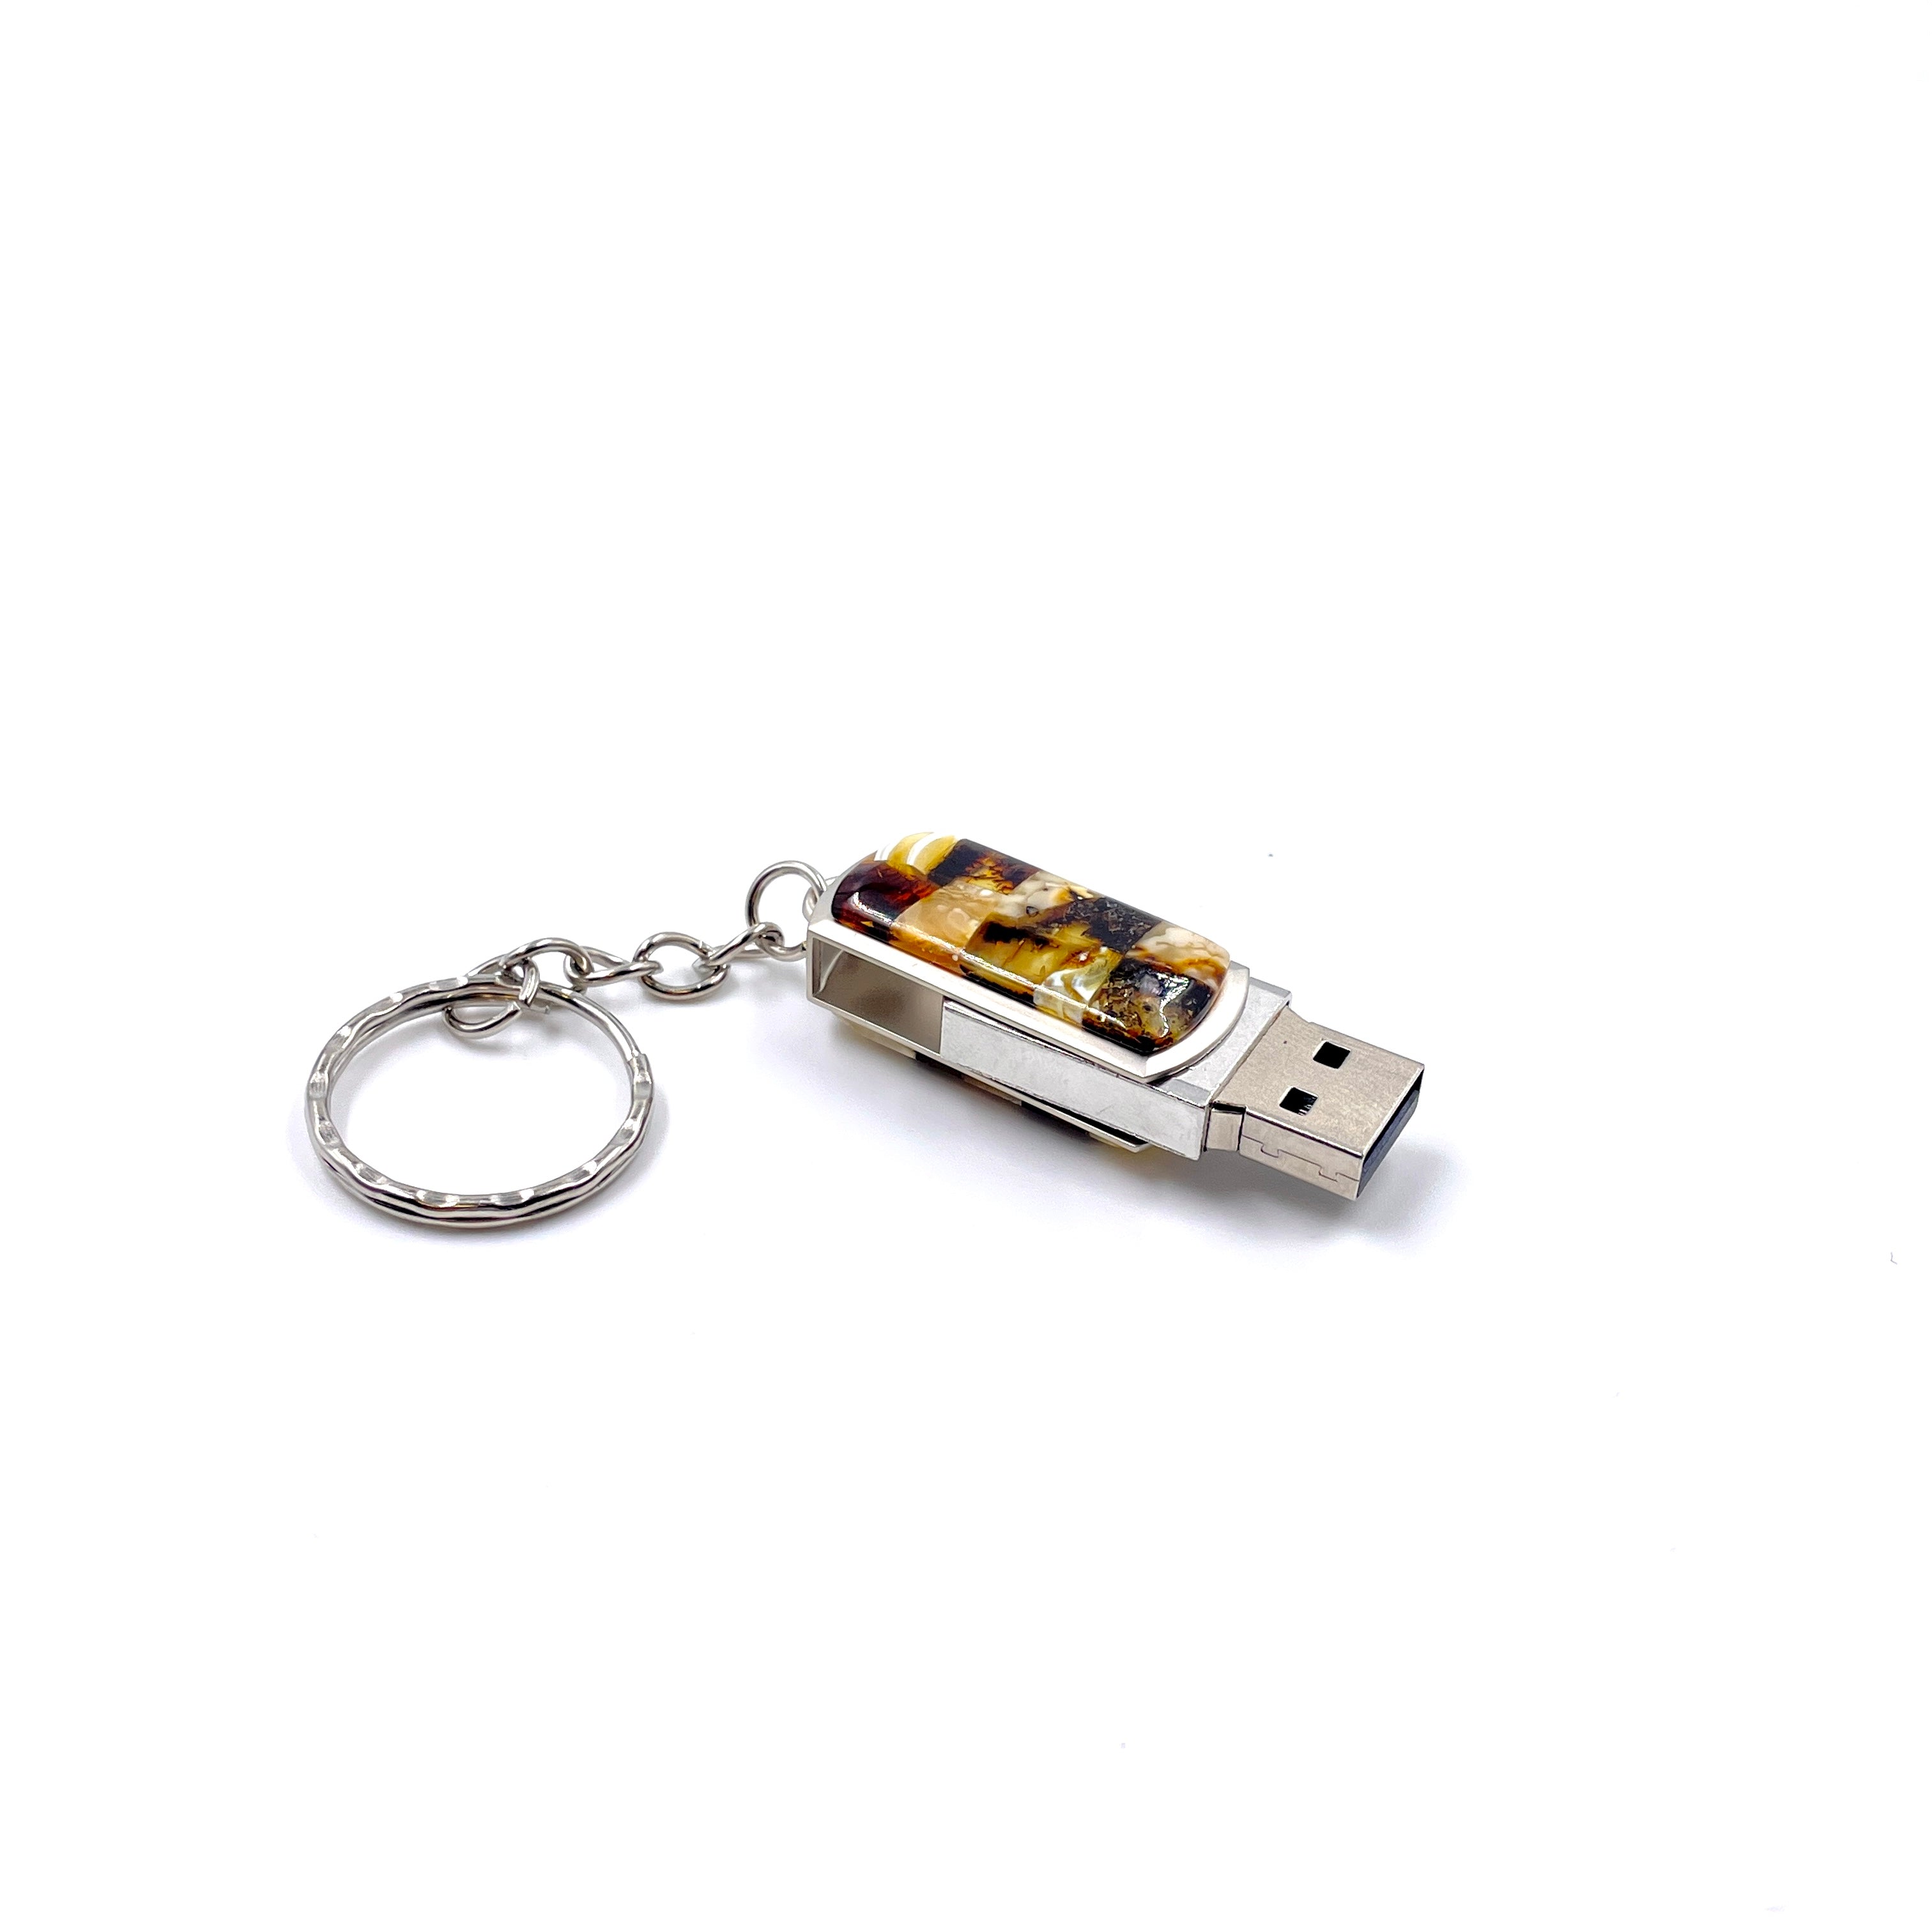 Keychain USB decorated with amber mosaic